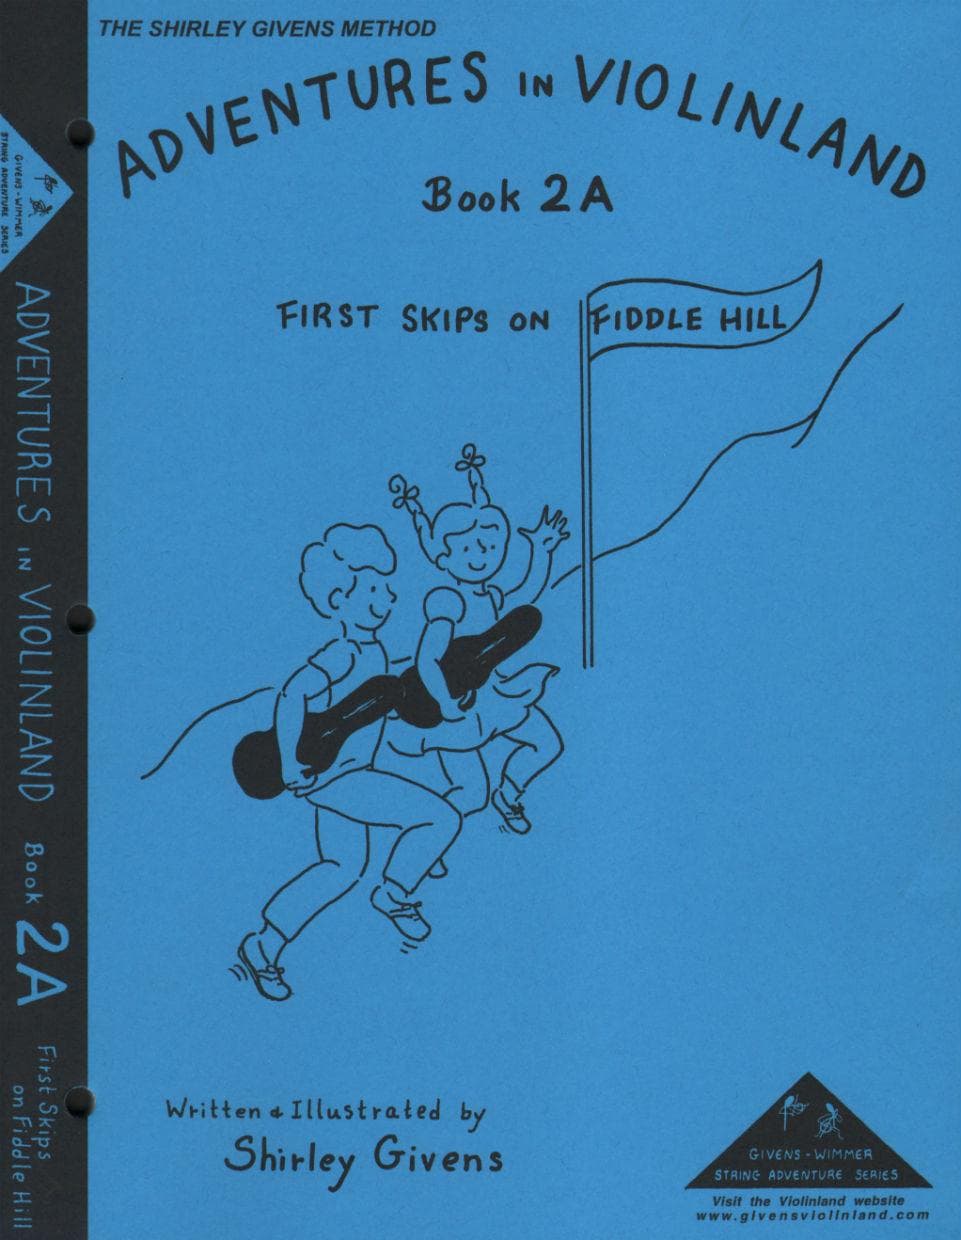 Givens, Shirley - Adventures in Violinland, Book 2A: "First Skips on Fiddle Hill" - Arioso Press Publication